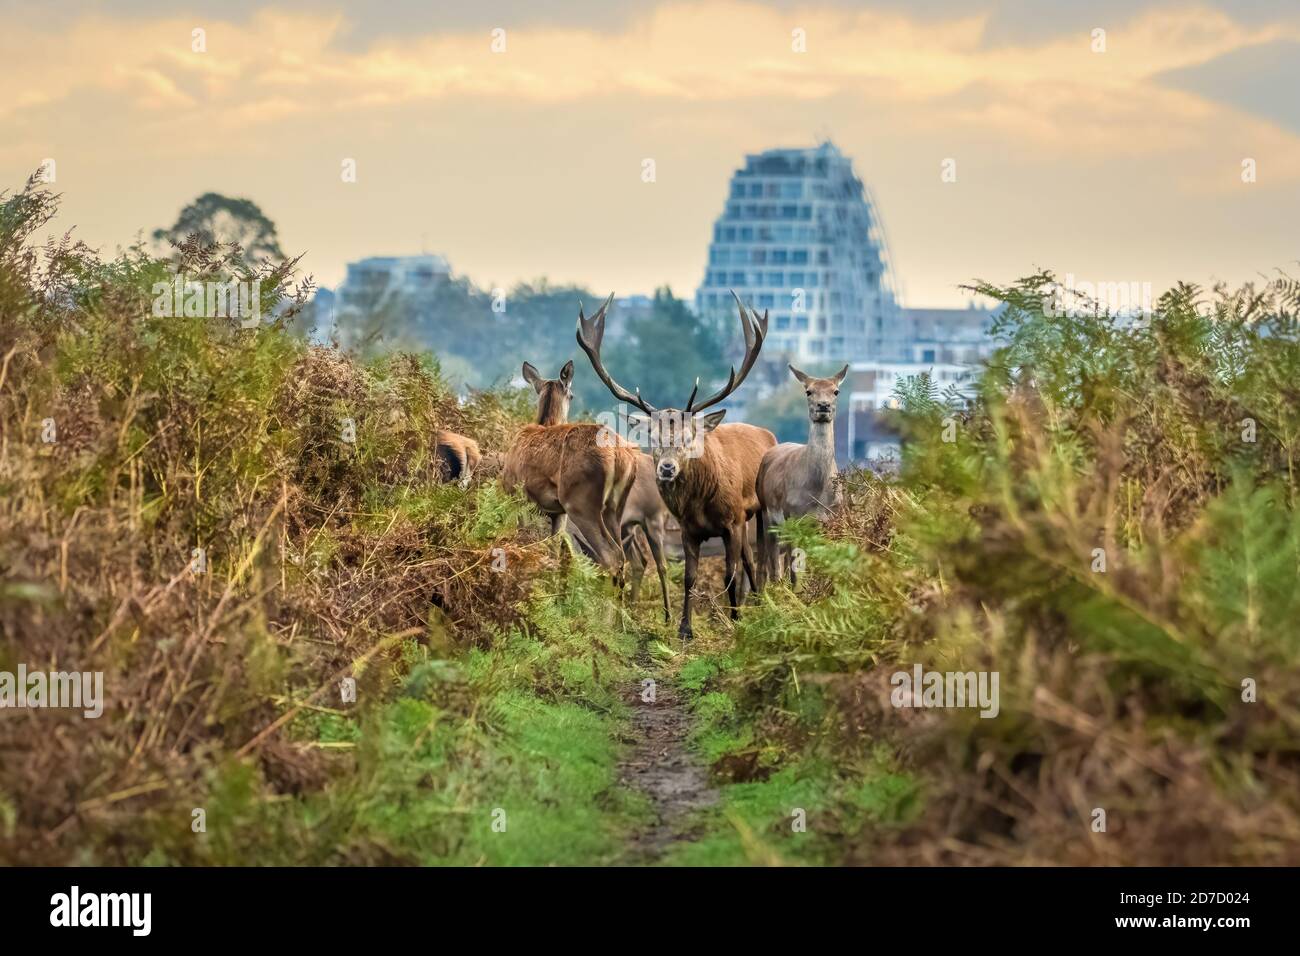 Red Deer and Buildings, Bushy Park, London Stock Photo